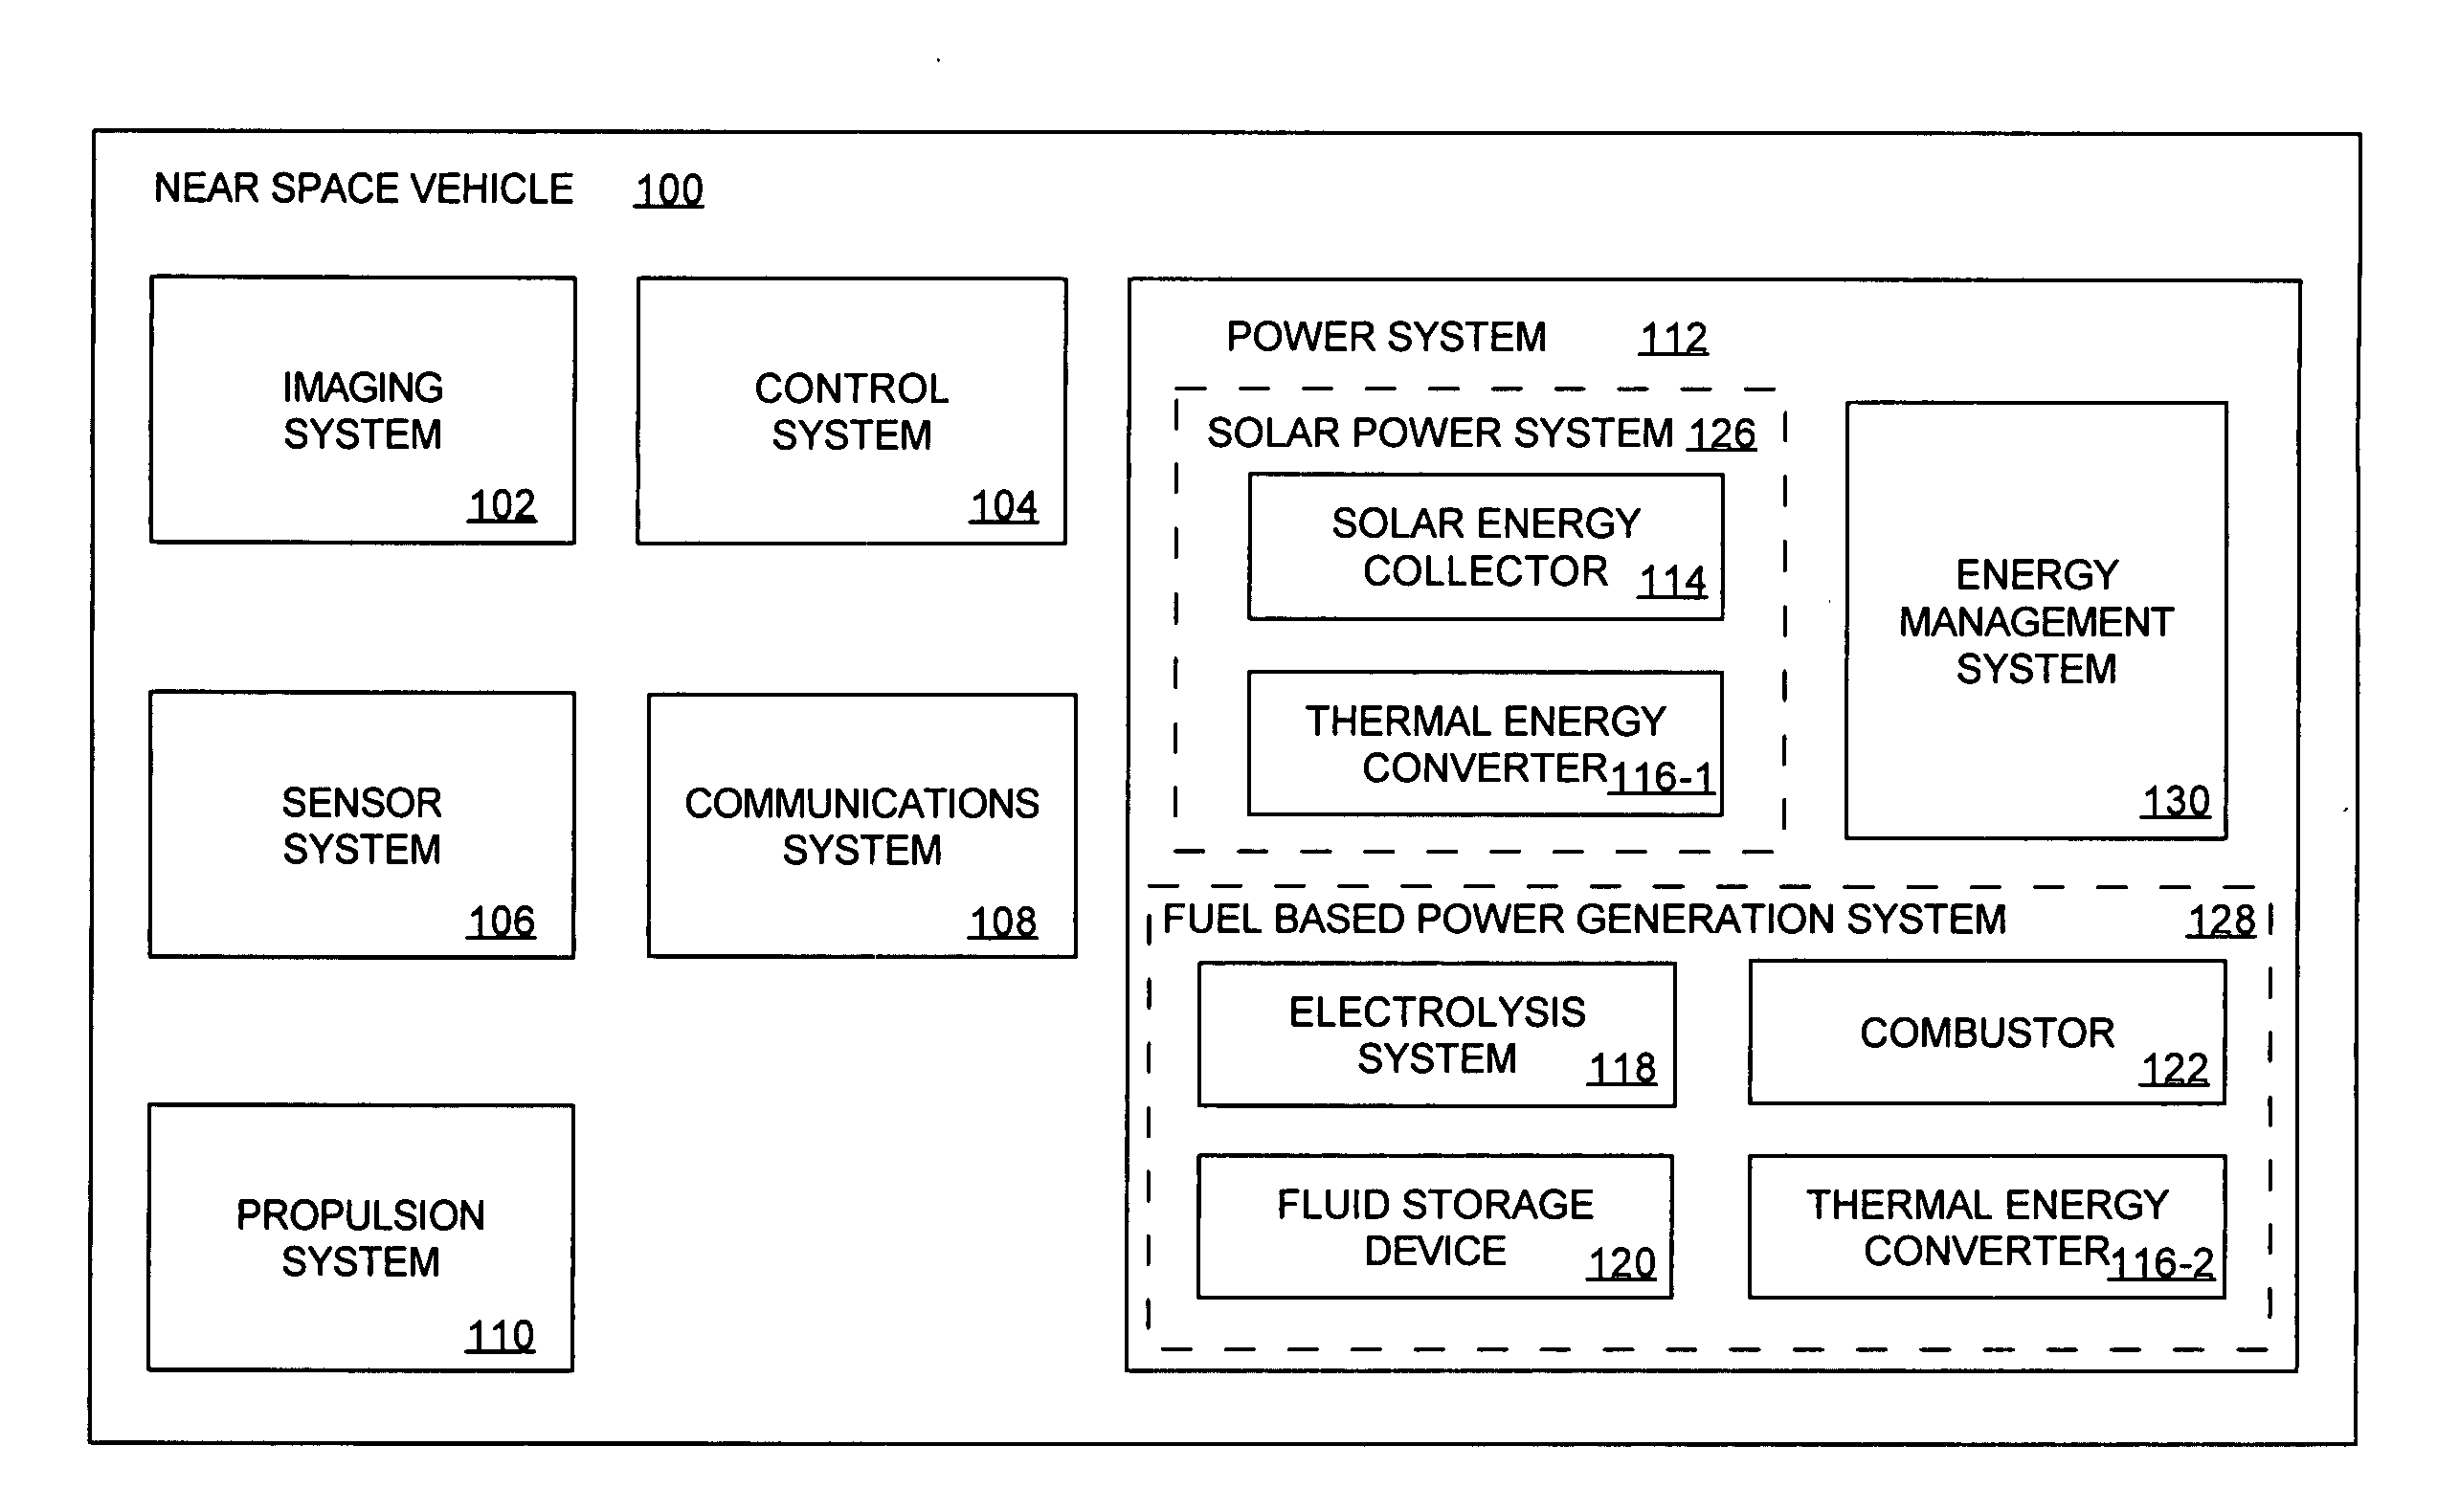 System for providing continuous electric power from solar energy